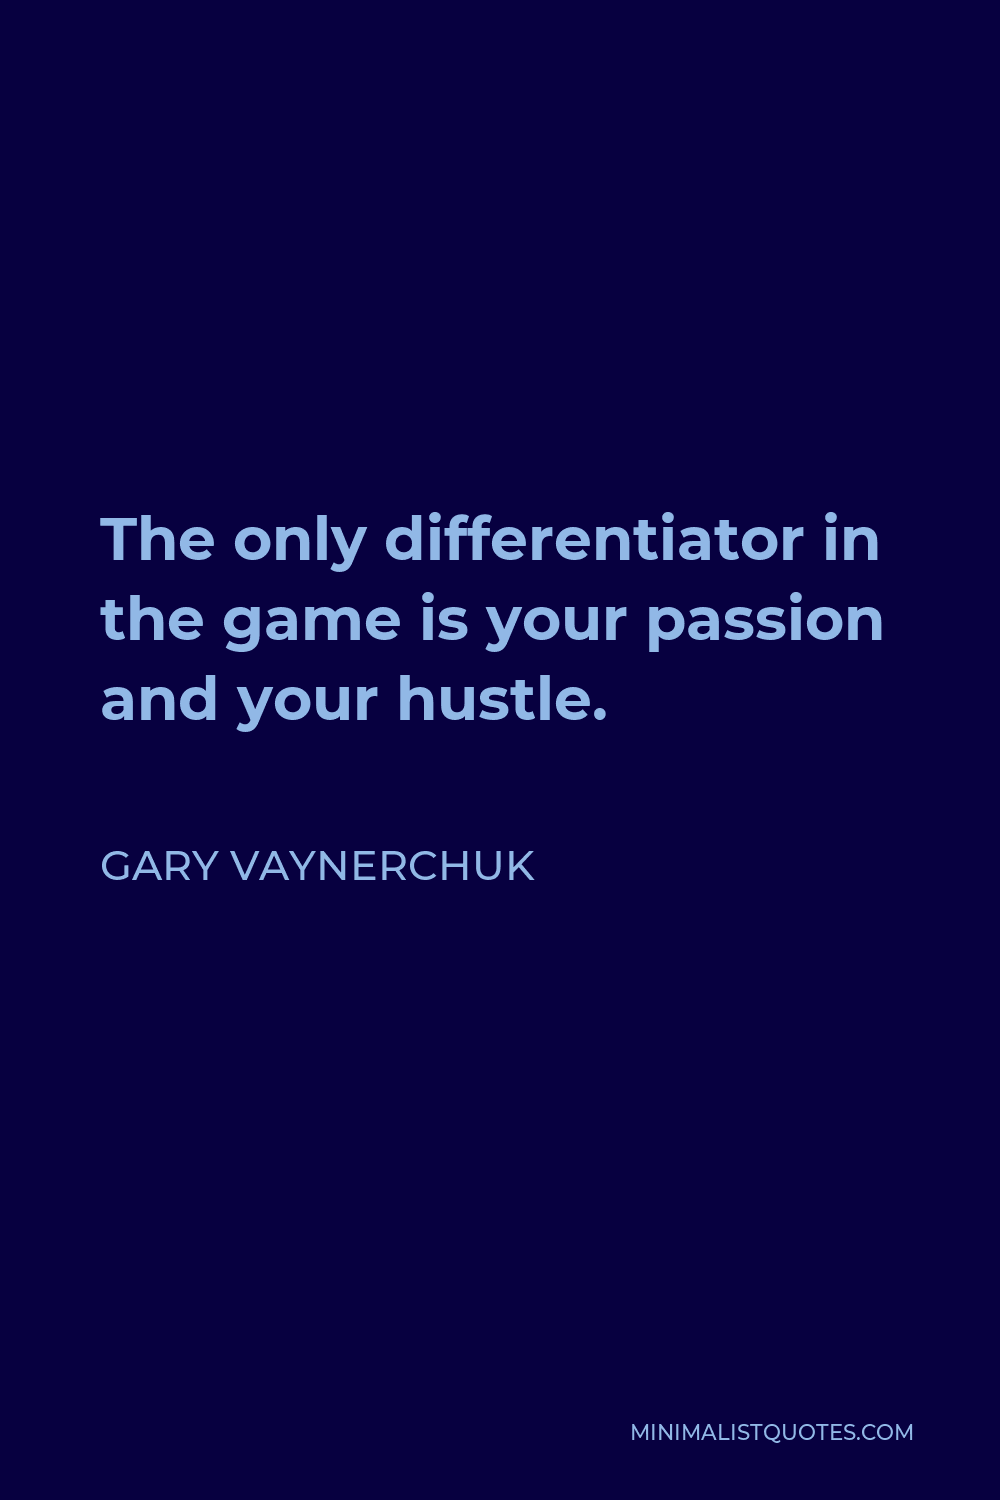 Gary Vaynerchuk Quote - The only differentiator in the game is your passion and your hustle.